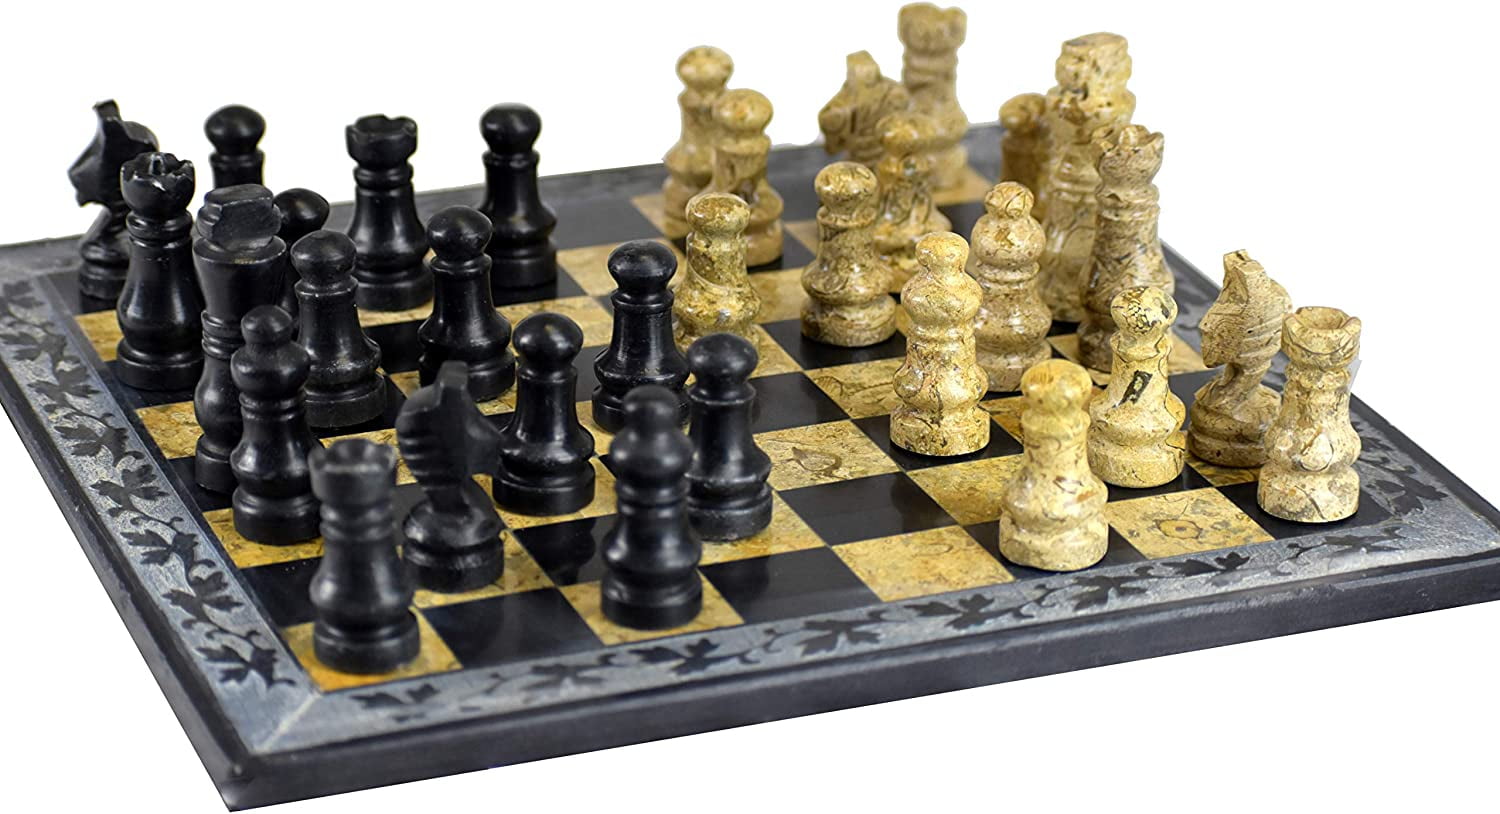 RADICALn 16 Inches Handmade Fossil Coral and Black Marble Full Chess Game Original Marble Chess Set